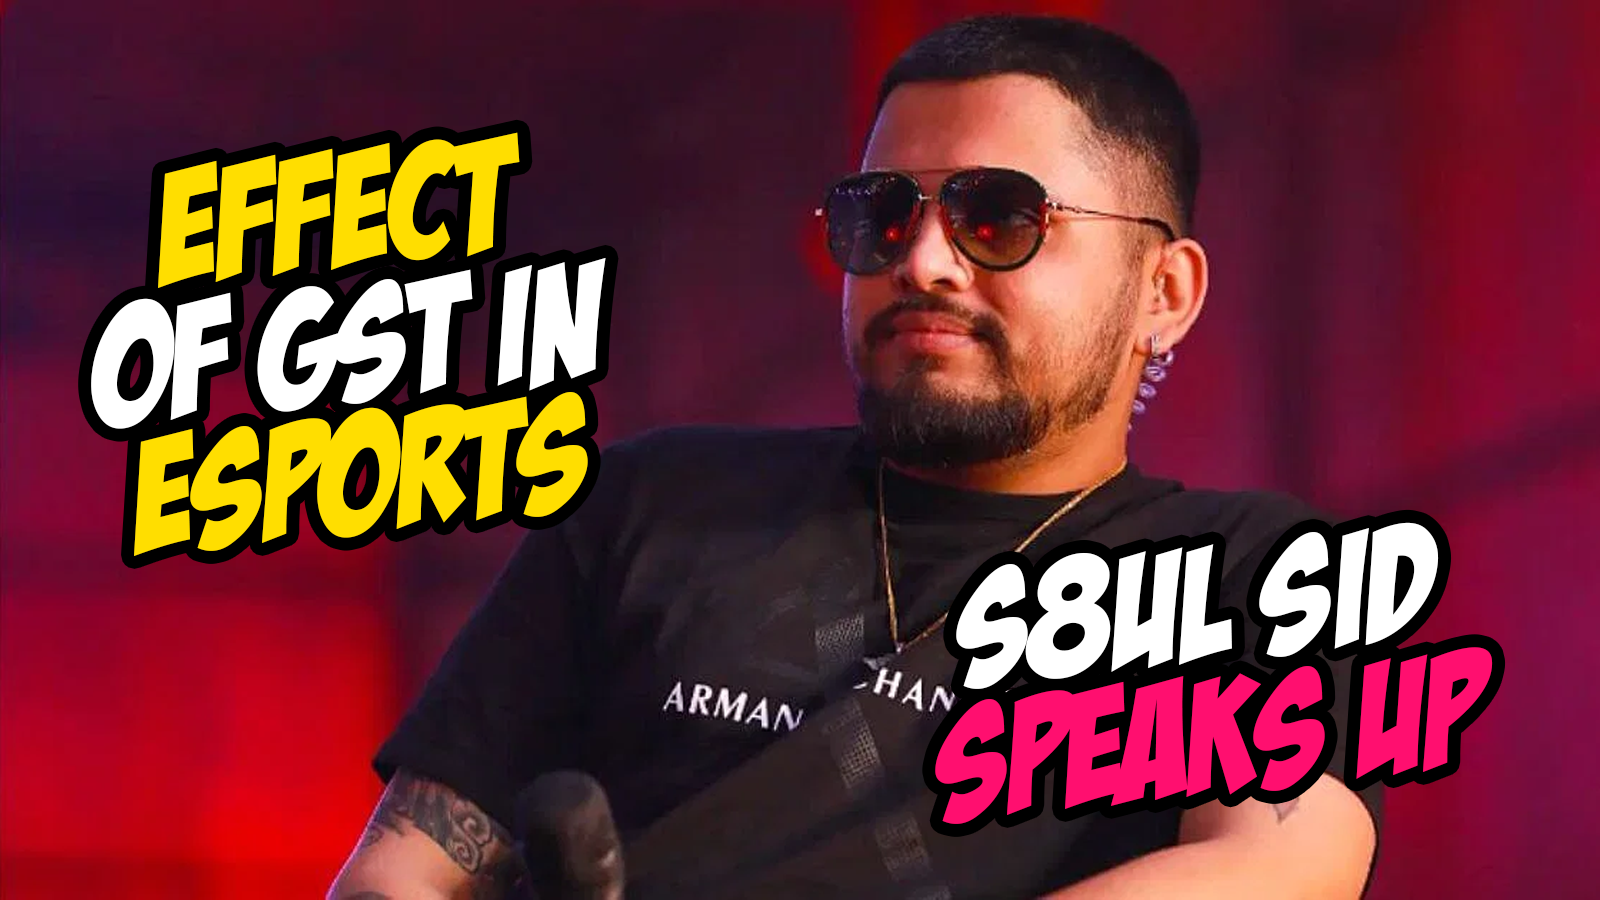 Indian eSports Faces Uncertainty Amidst GST Proposal – S8UL Sid Speaks Up